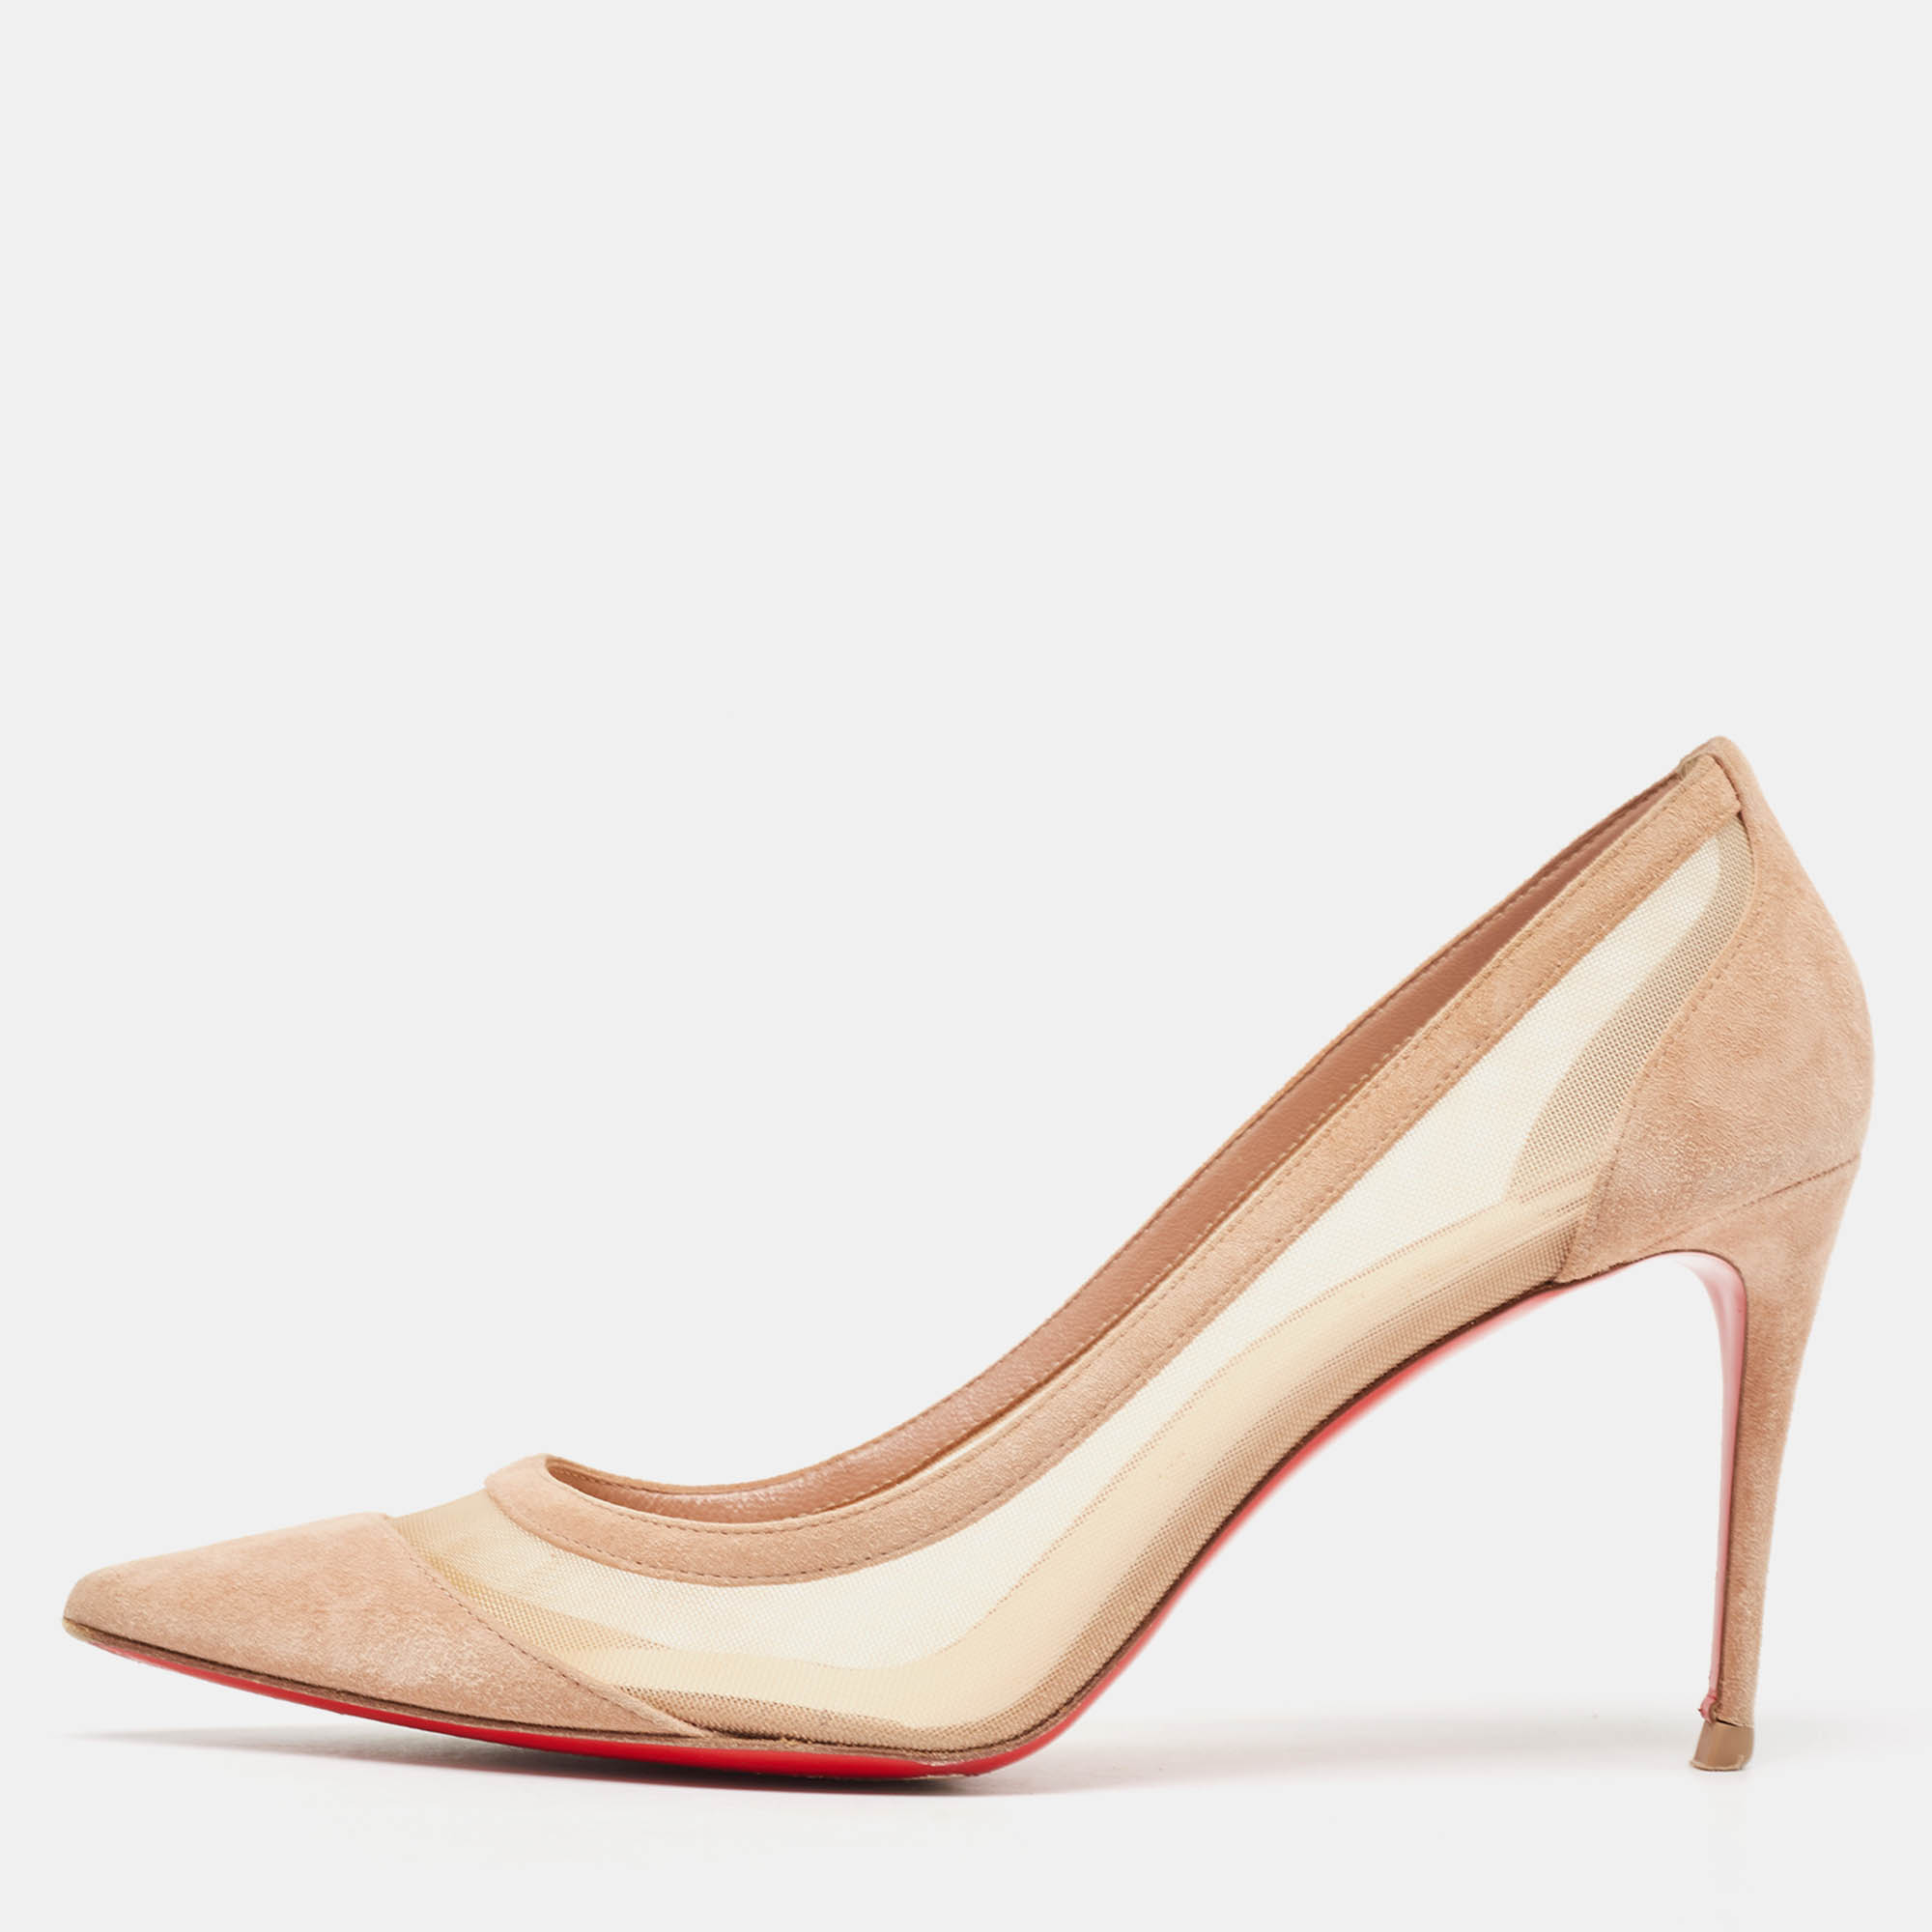 Christian louboutin beige mesh and suede paulina pumps size 41